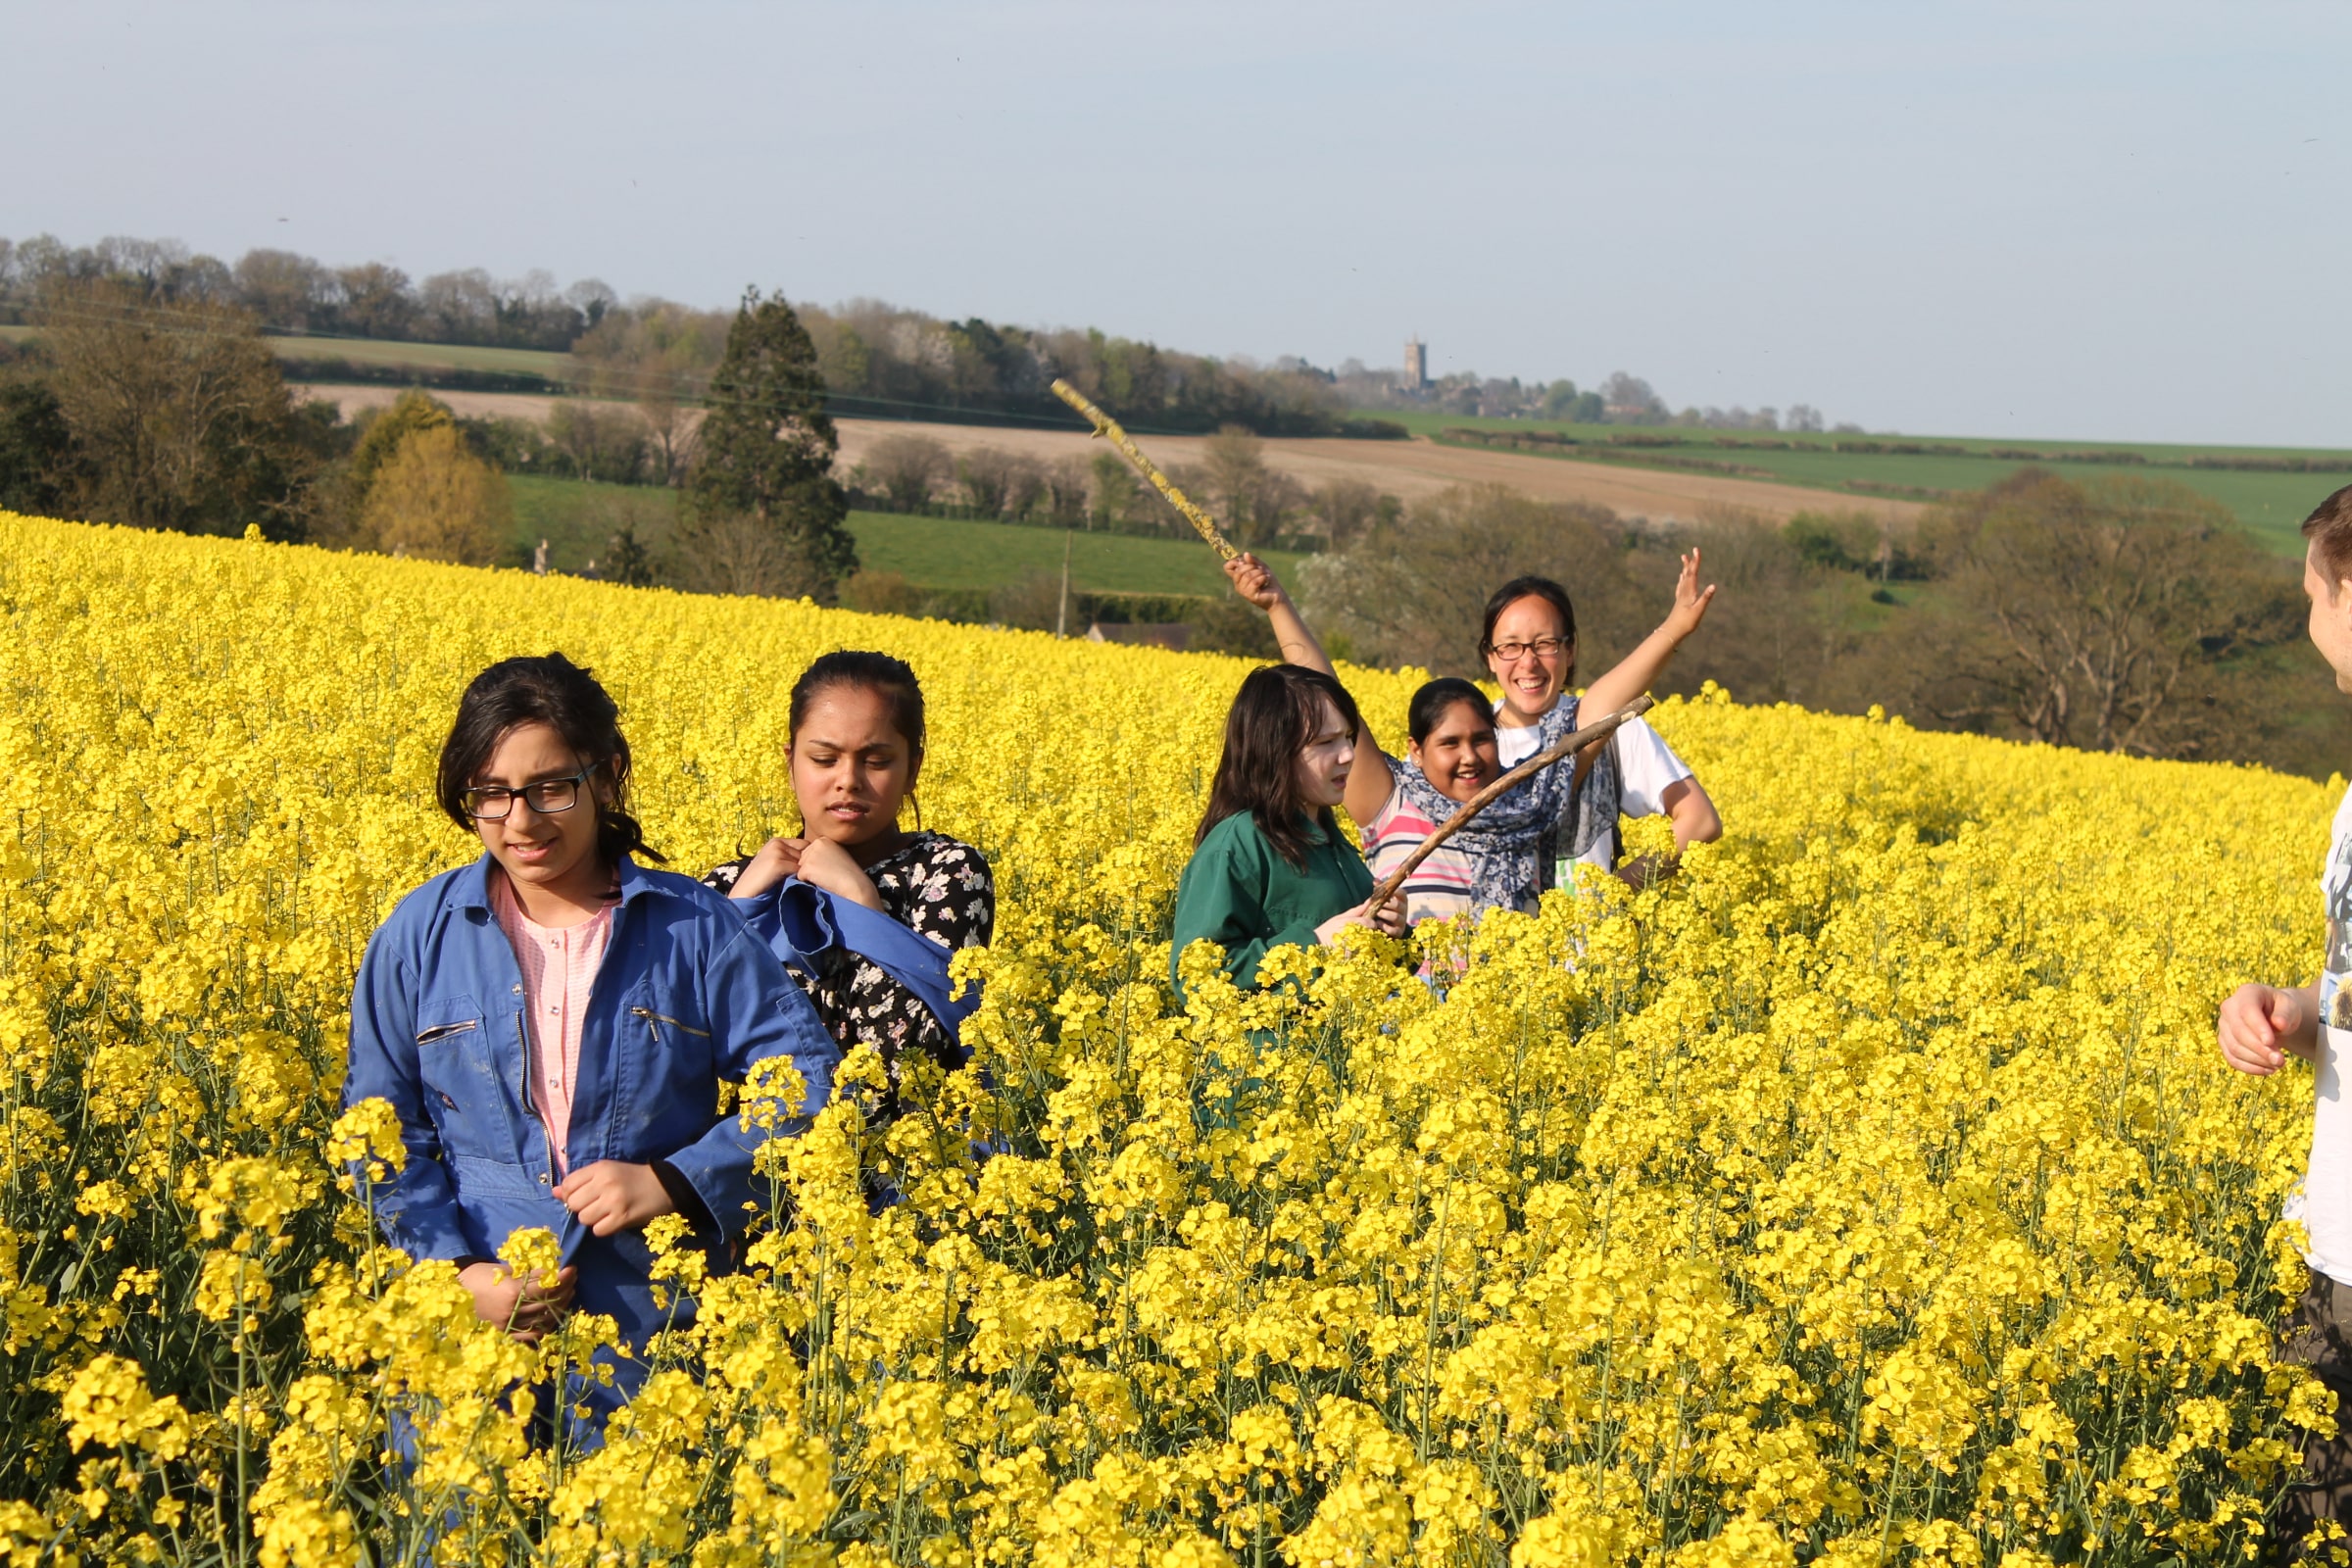 Five young people dressed in blue overalls pictured within a field of vibrant yellow flowers